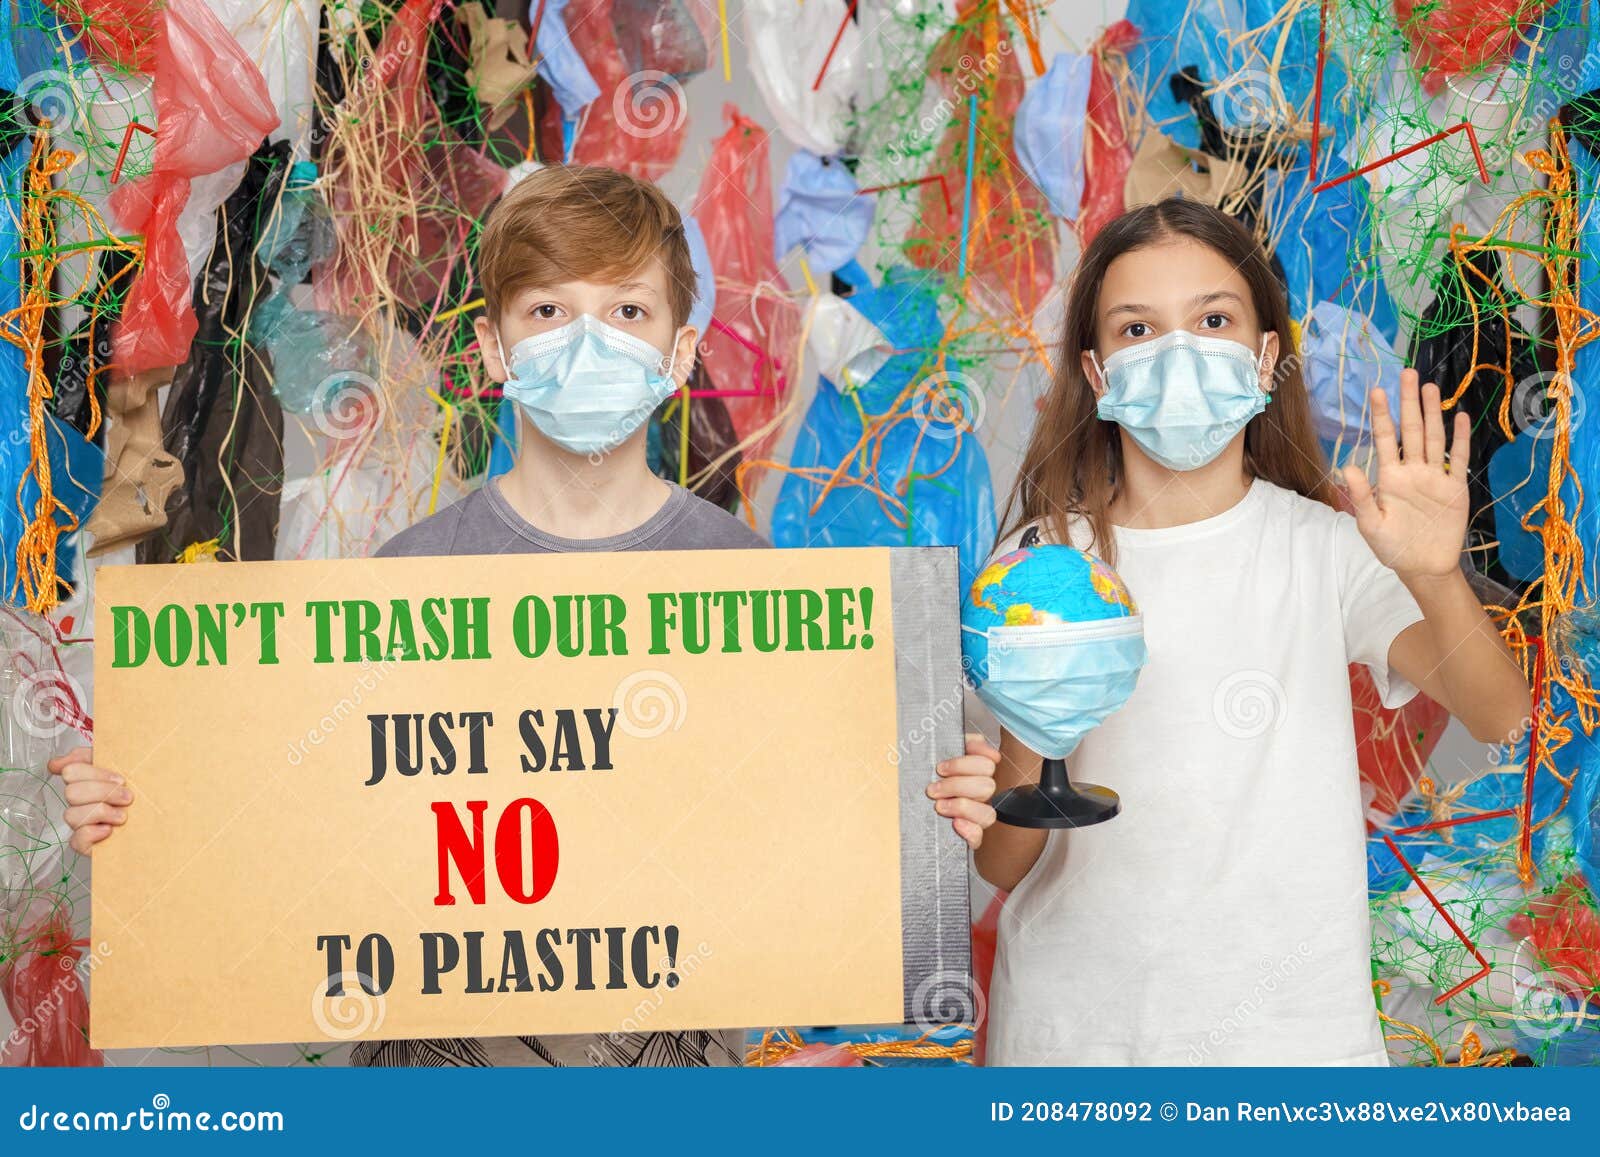 youth generation protesting against plastic pollution